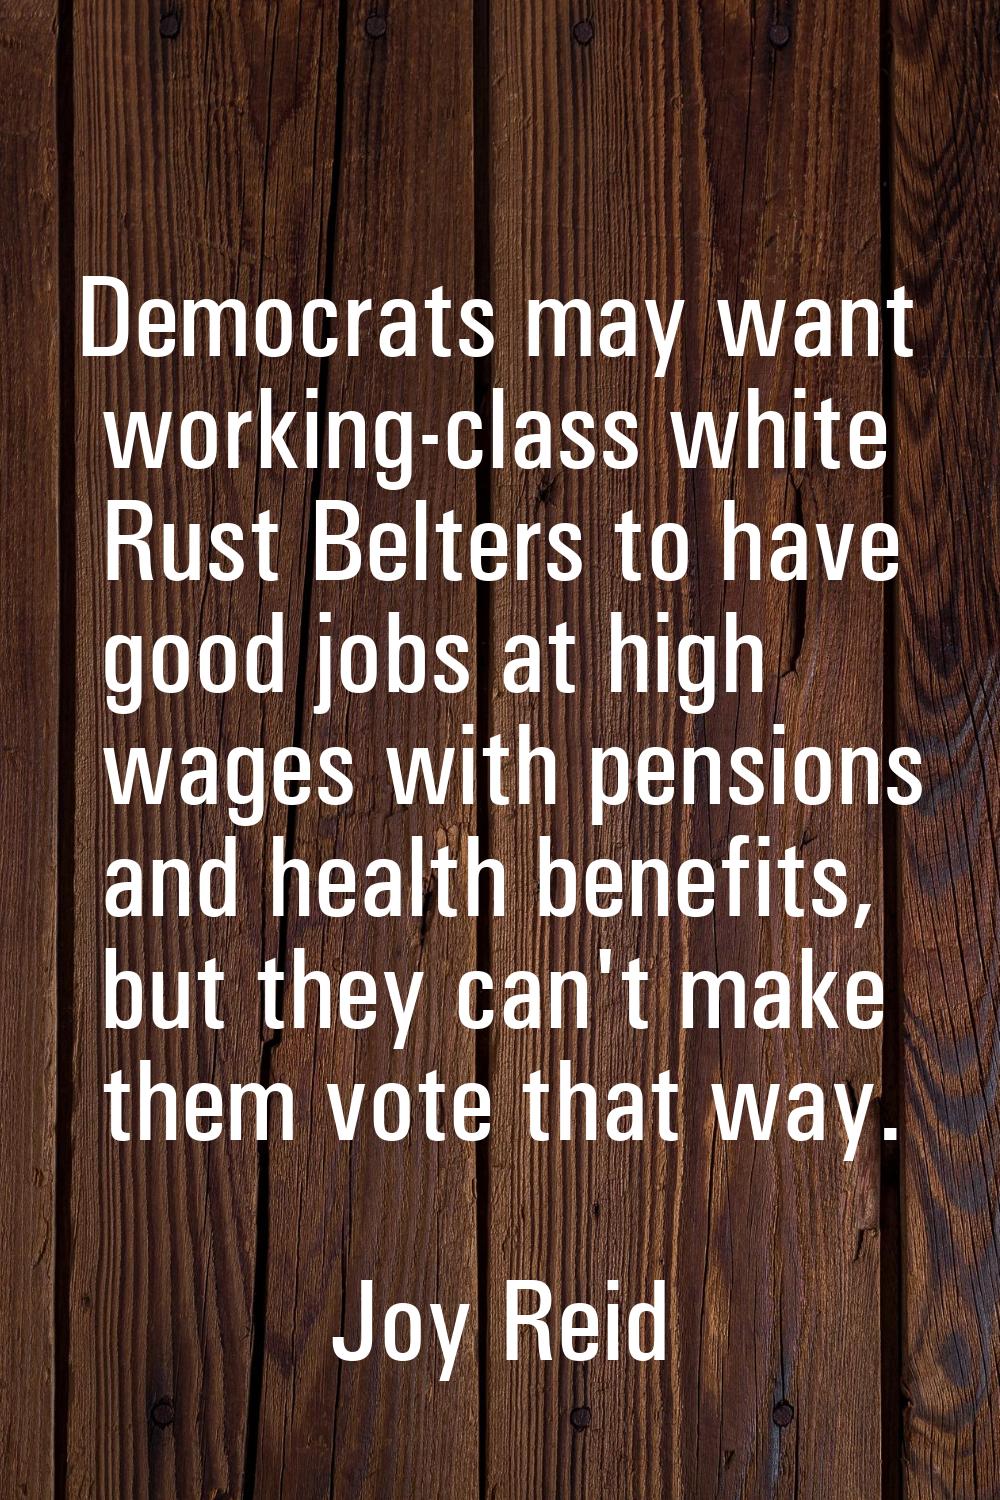 Democrats may want working-class white Rust Belters to have good jobs at high wages with pensions a